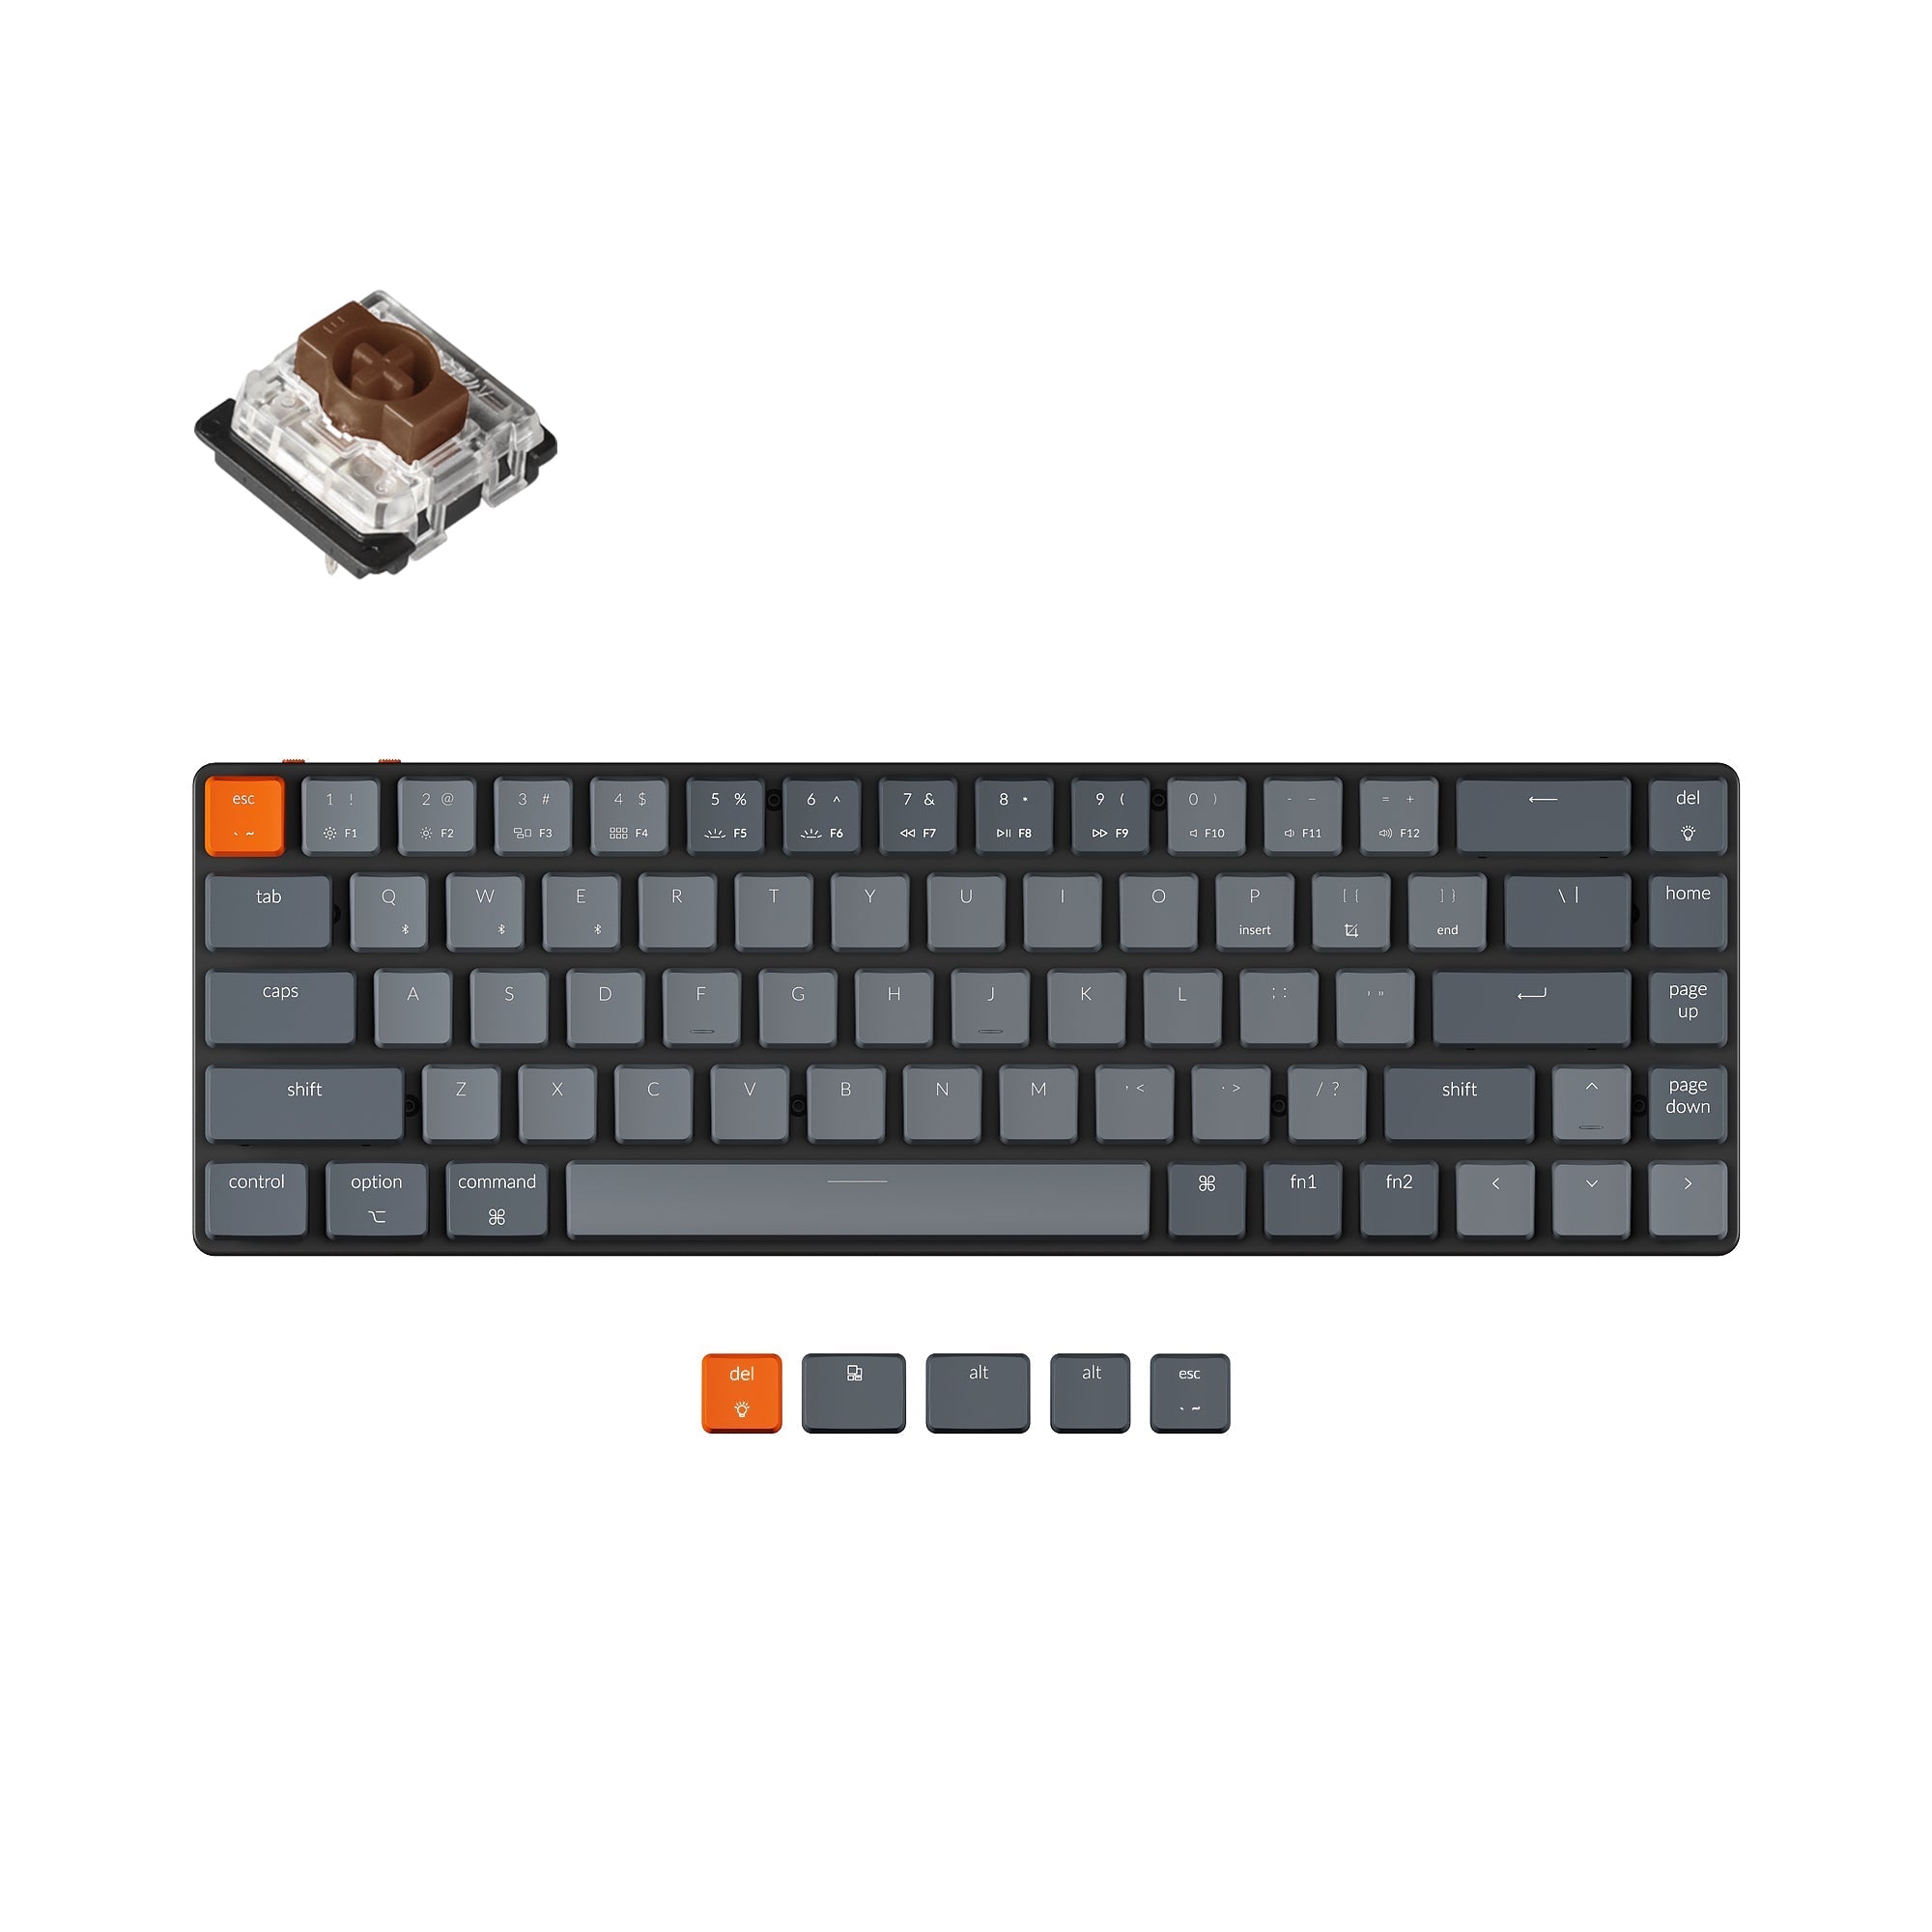 Keychron K7 65-percent ultra-slim compact wireless mechanical keyboard for Mac Windows Hot-swappable low-profile Gateron Mechanical brown switches with White backlit